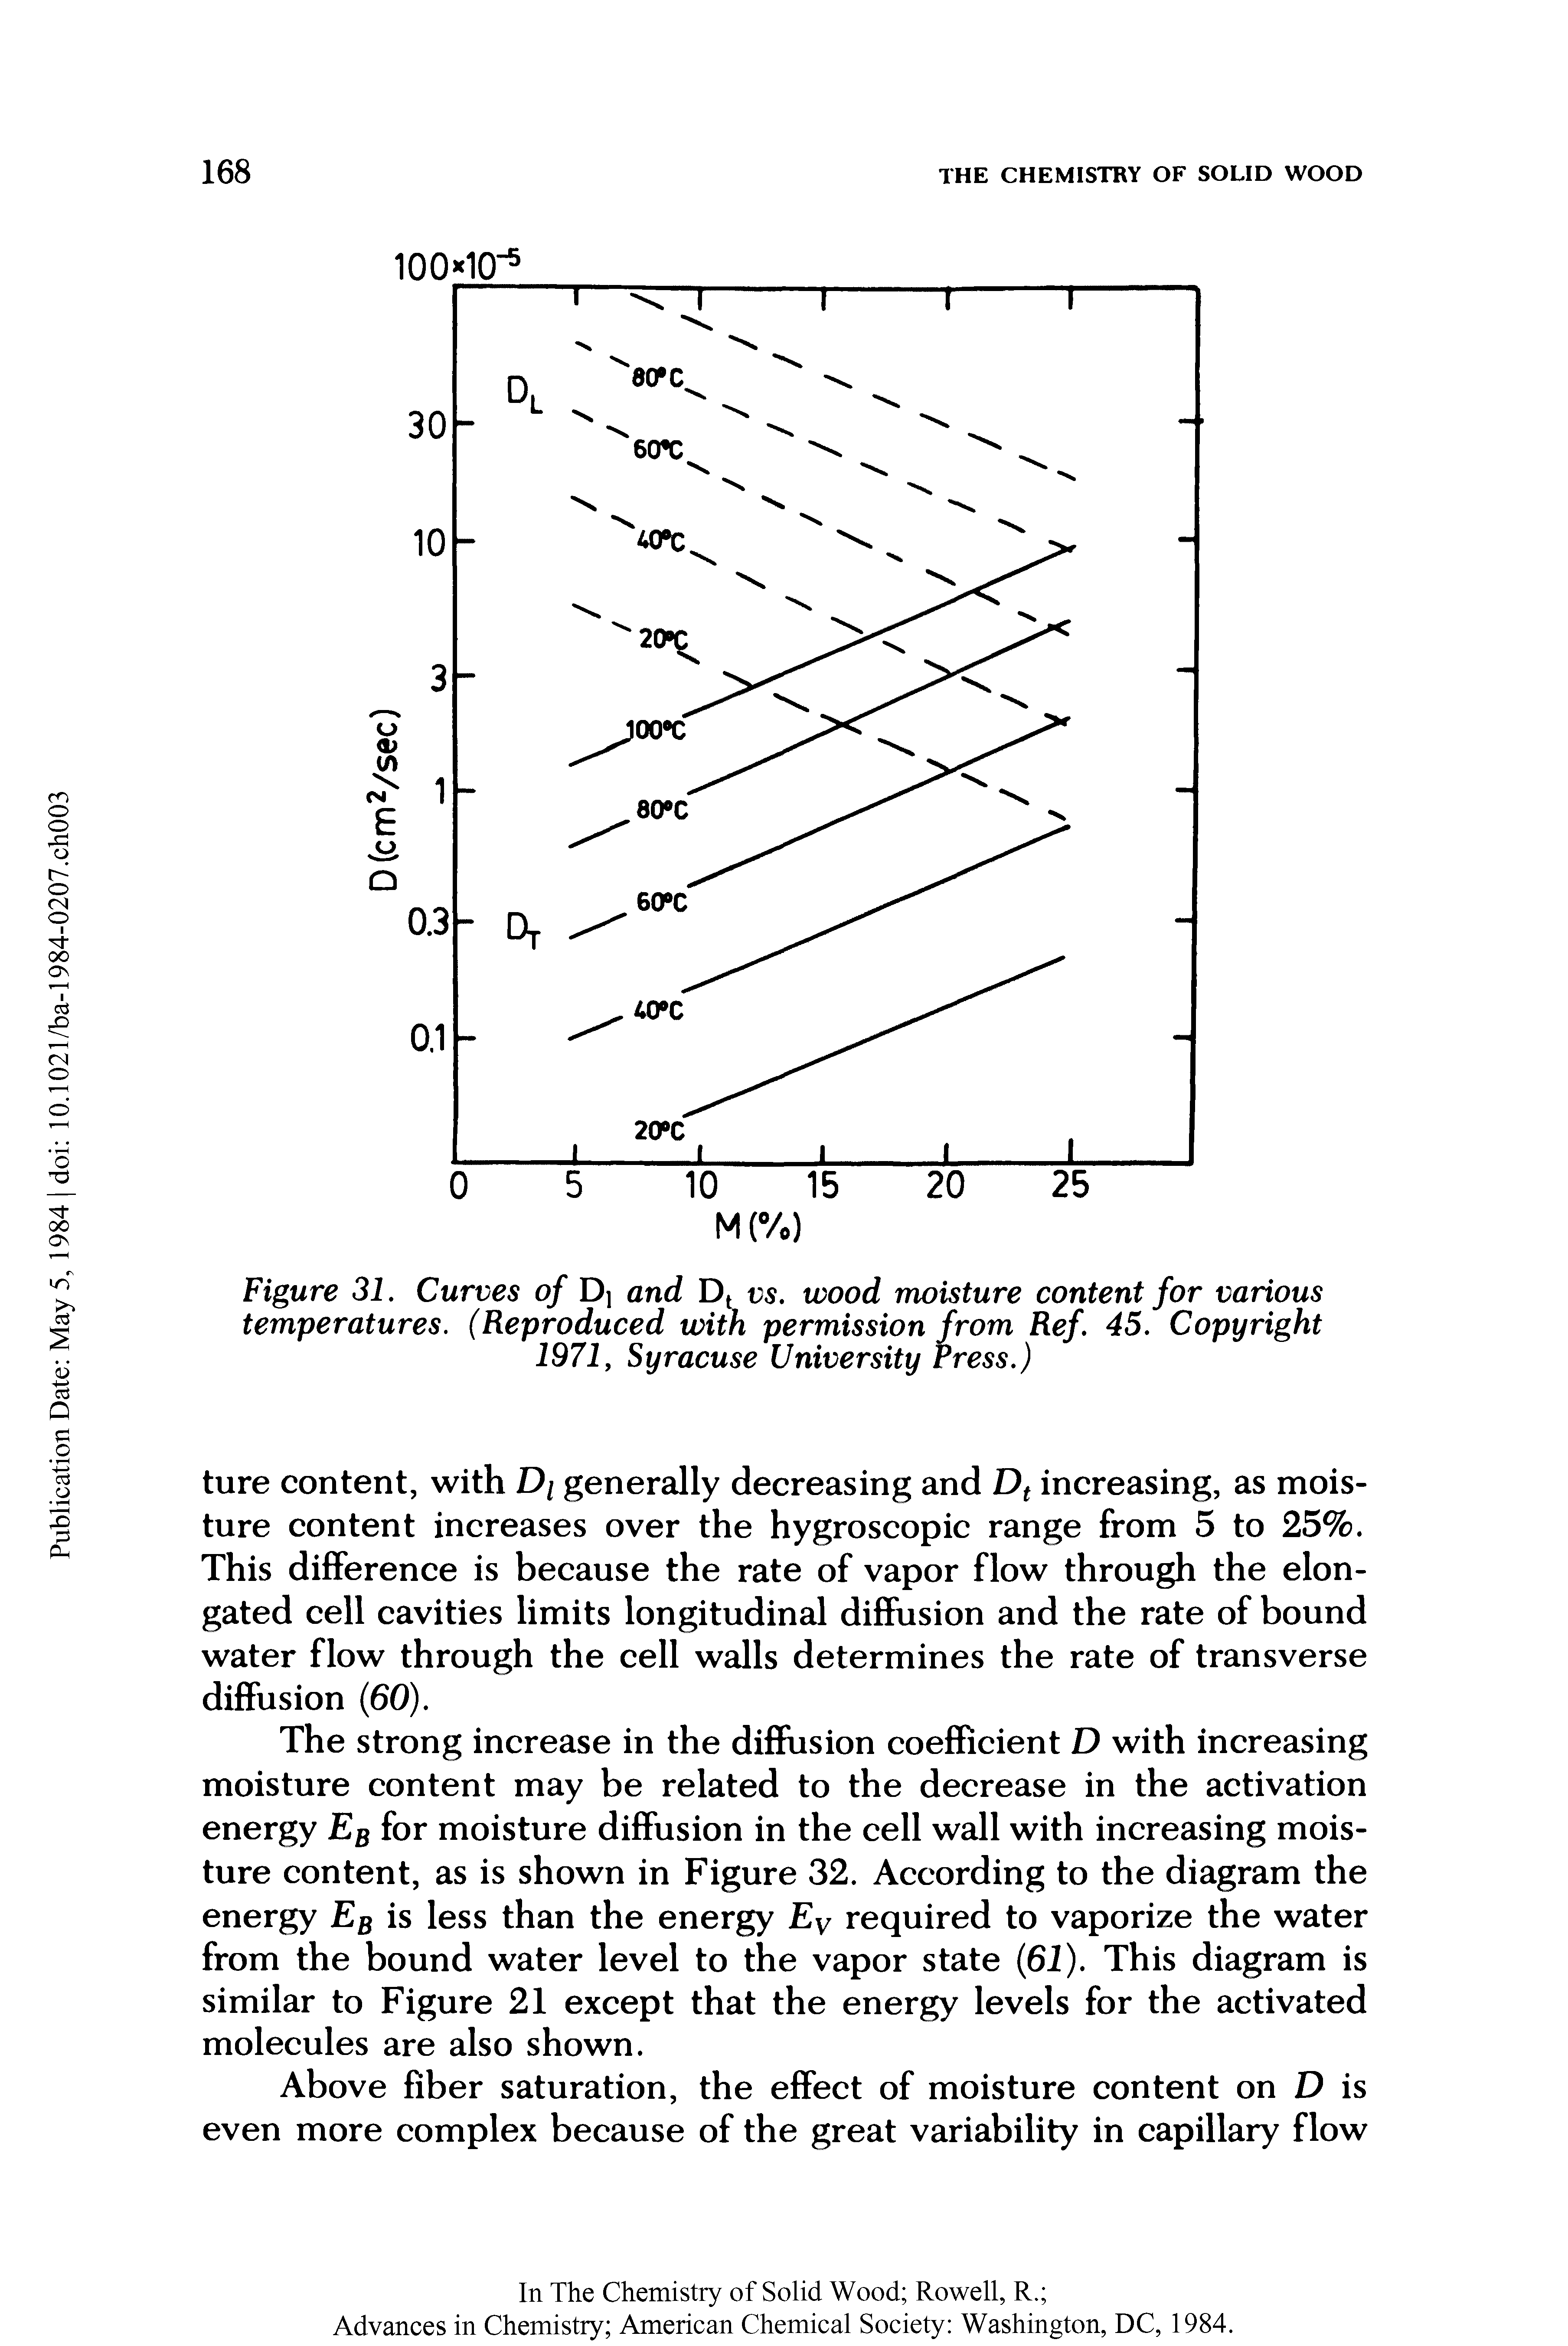 Figure 31. Curves of Dj and D vs. wood moisture content for various temperatures. (Reproduced with permission from Ref. 45. Copyright 1971 y Syracuse University tress.)...